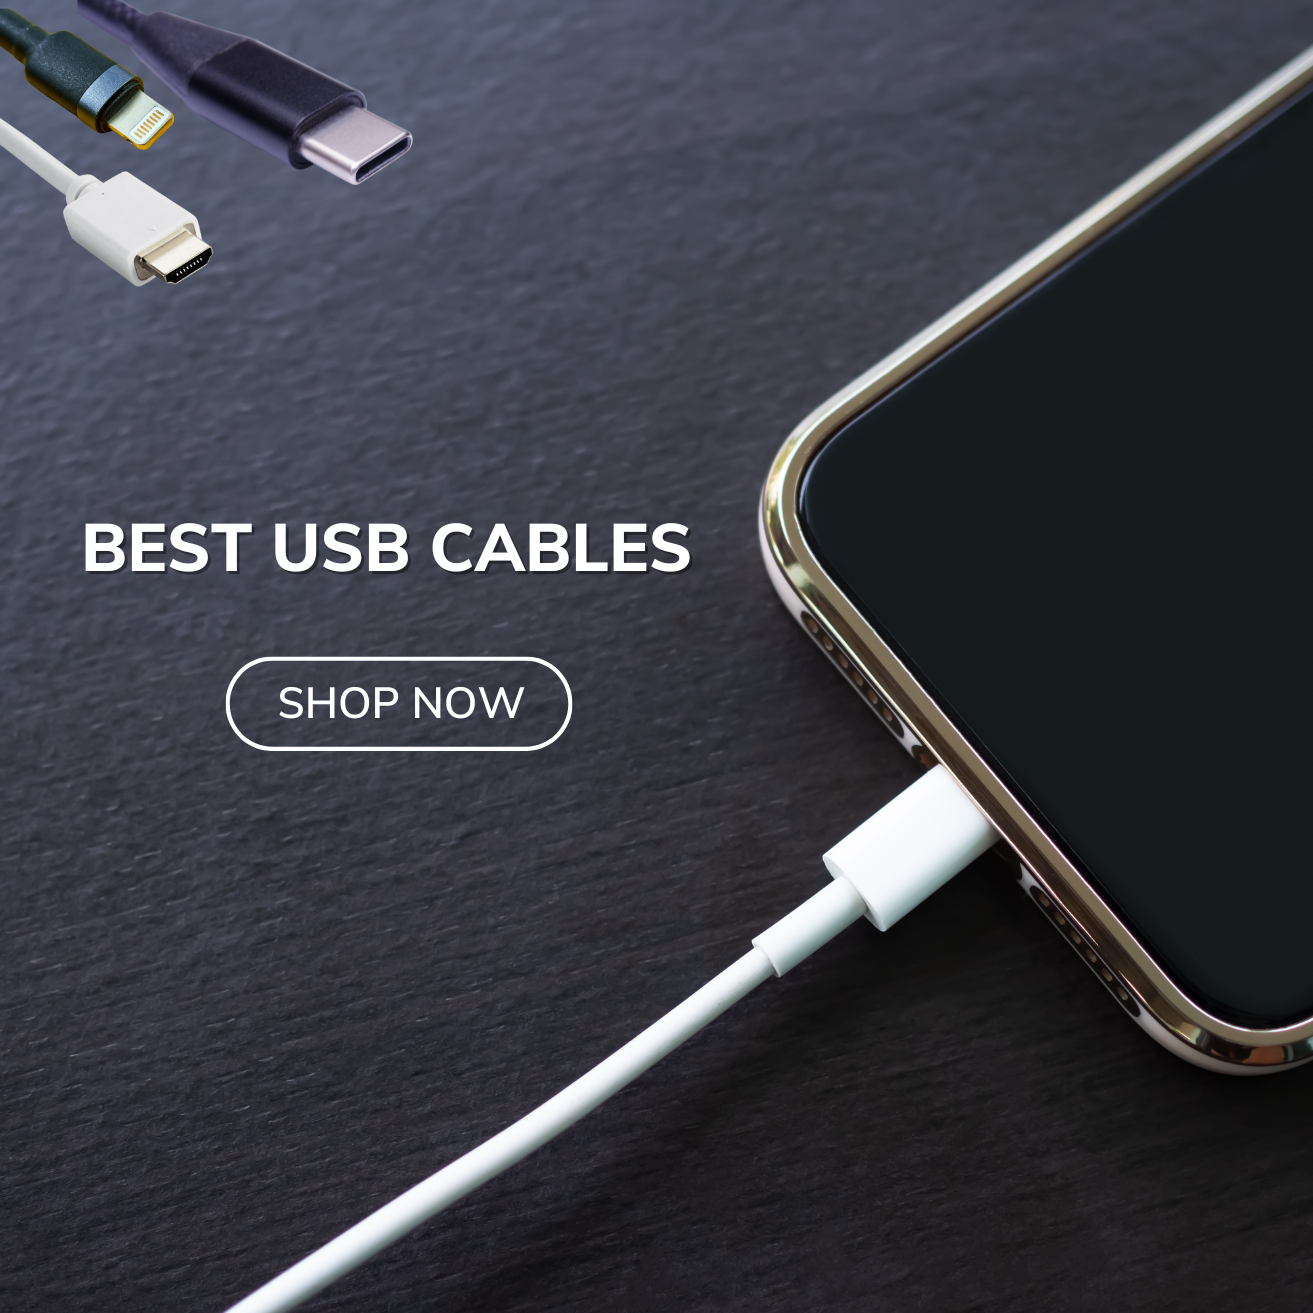 Best USB Cables